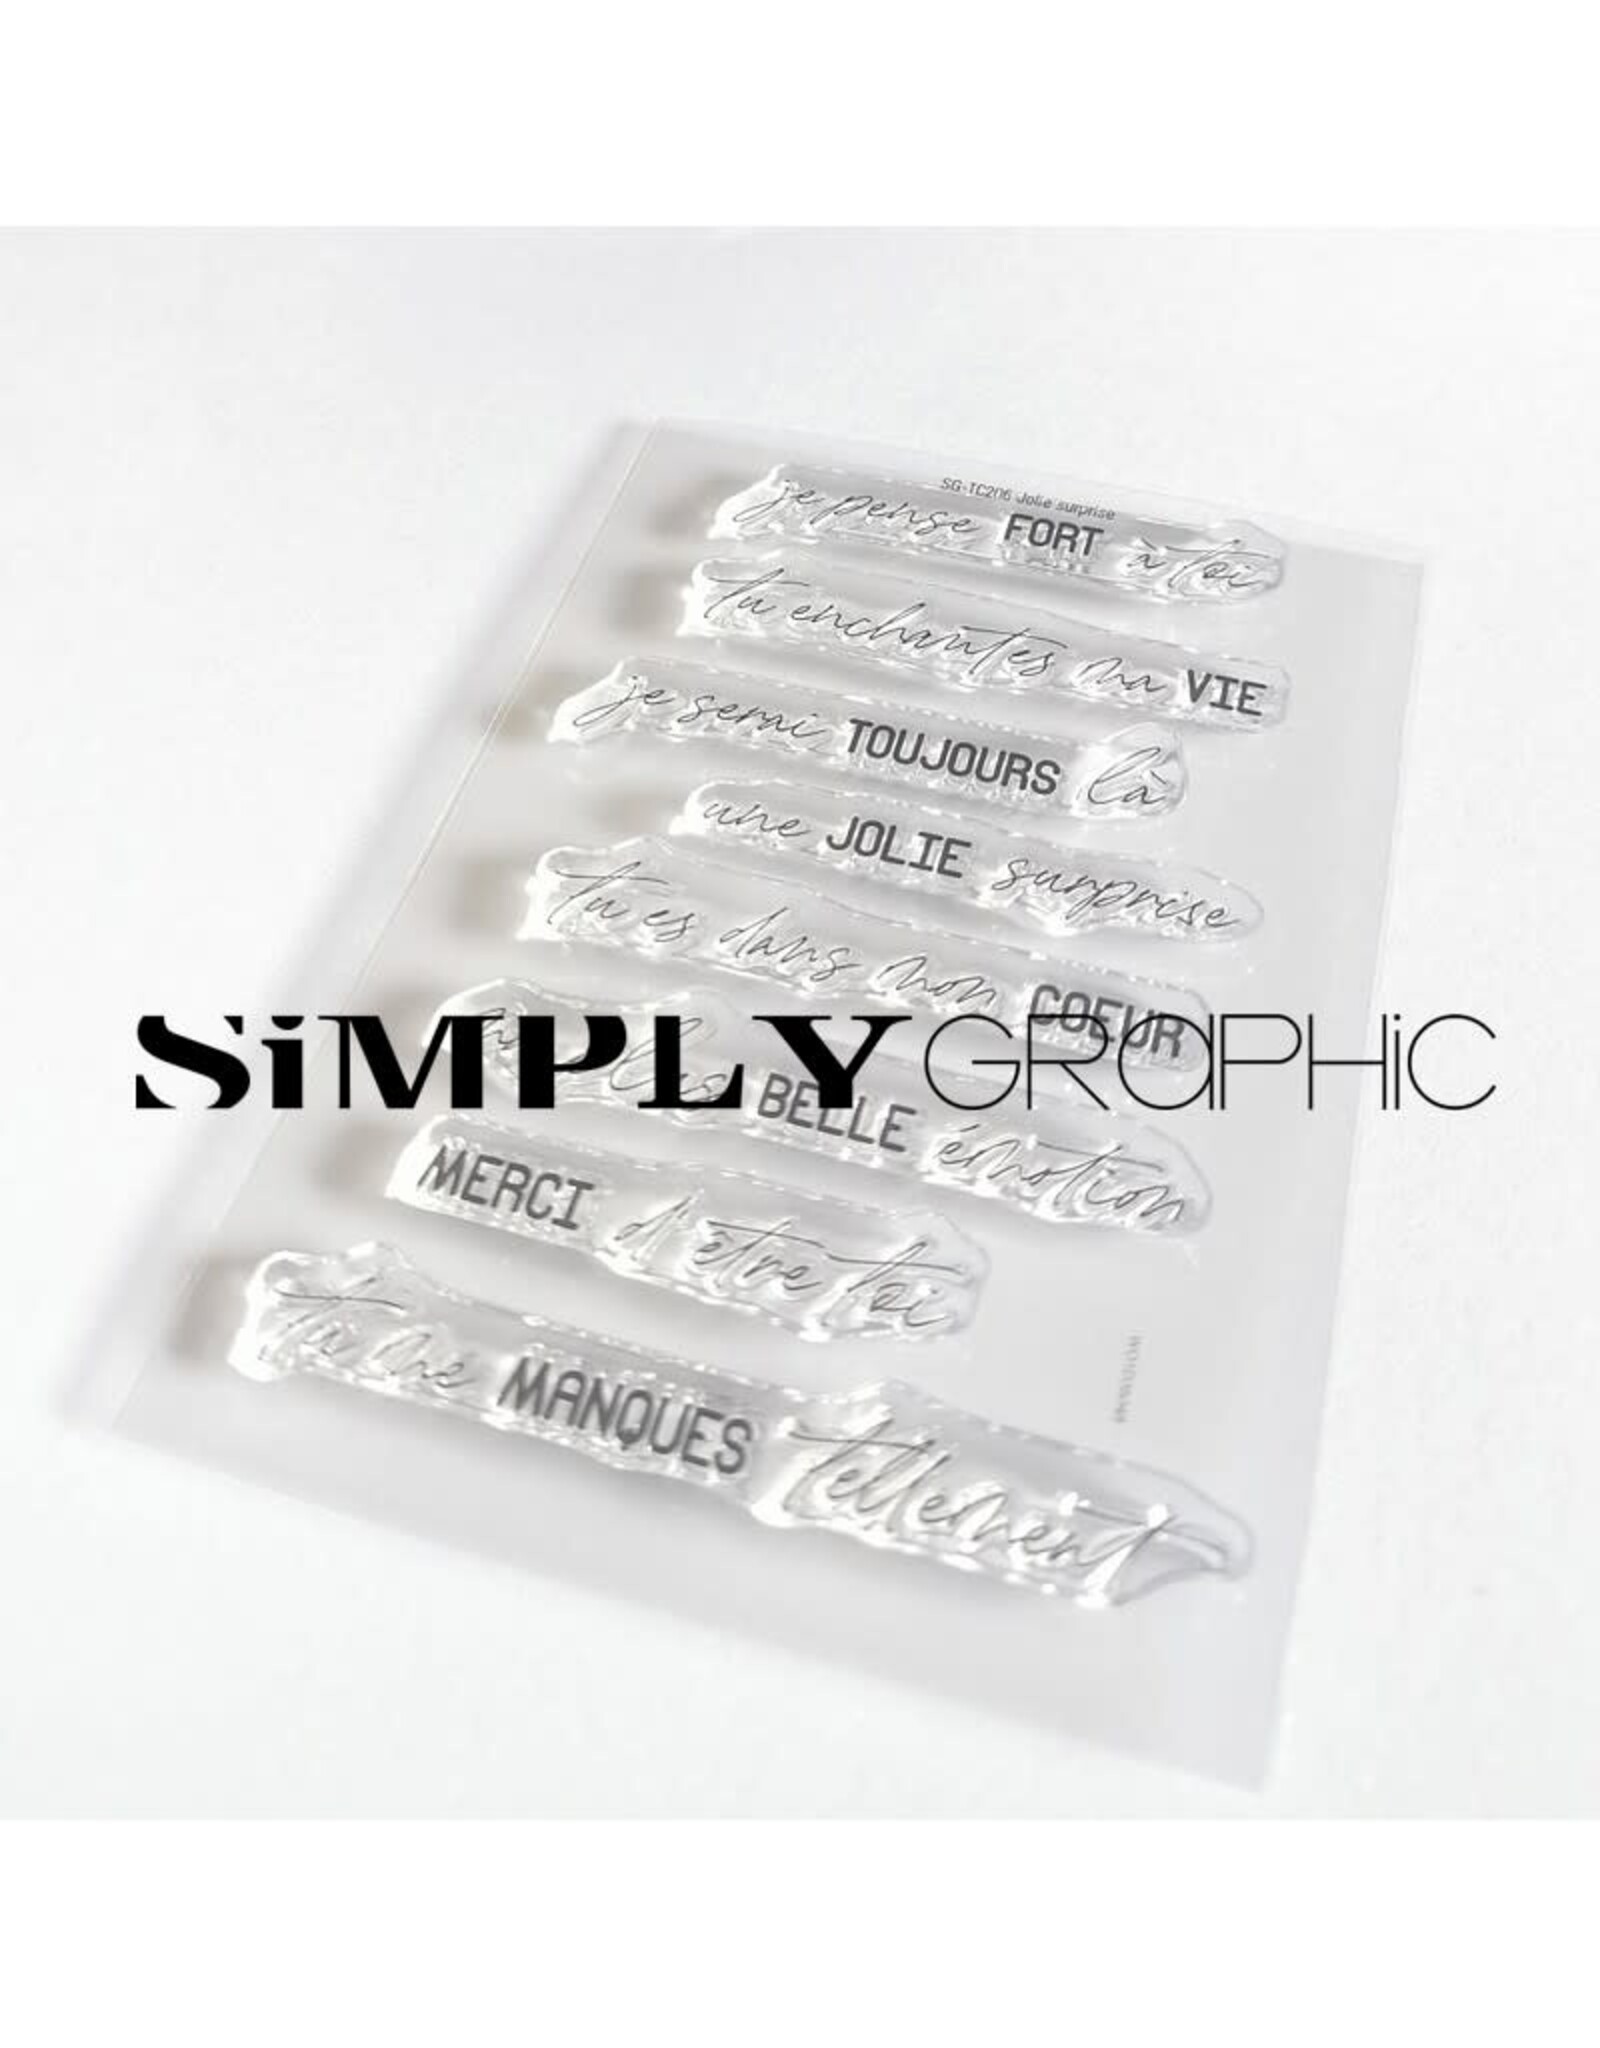 SIMPLY GRAPHIC SIMPLY GRAPHIC PLANCHE JOLIE SURPRISE CLEAR STAMP SET